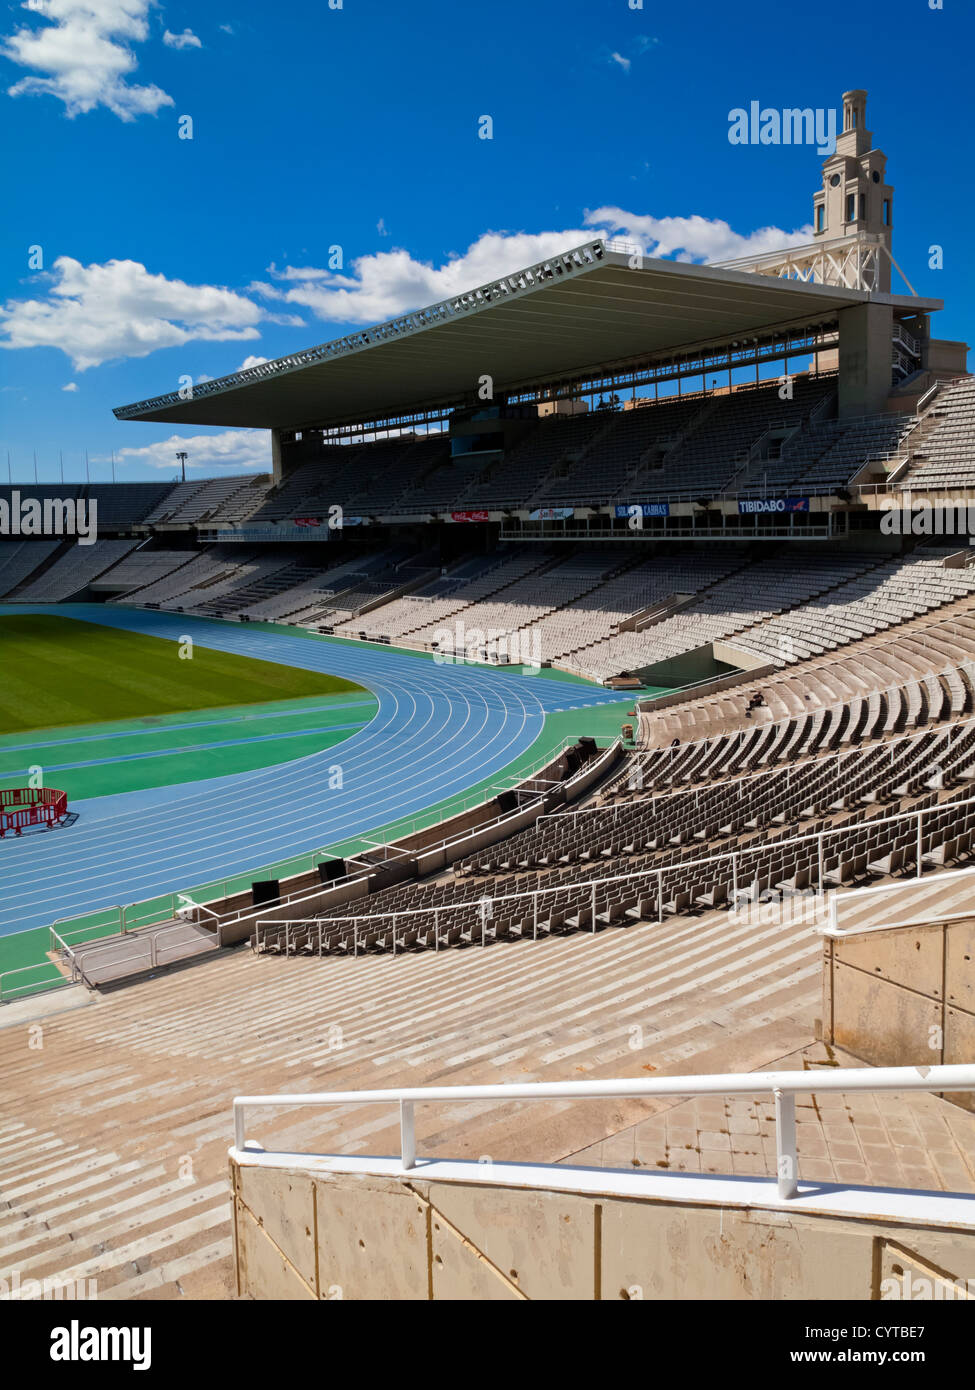 Barcelona Olympic Stadium at Montjuic Barcelona Spain built in 1927 and renovated for the 1992 Olympic games with empty seats Stock Photo